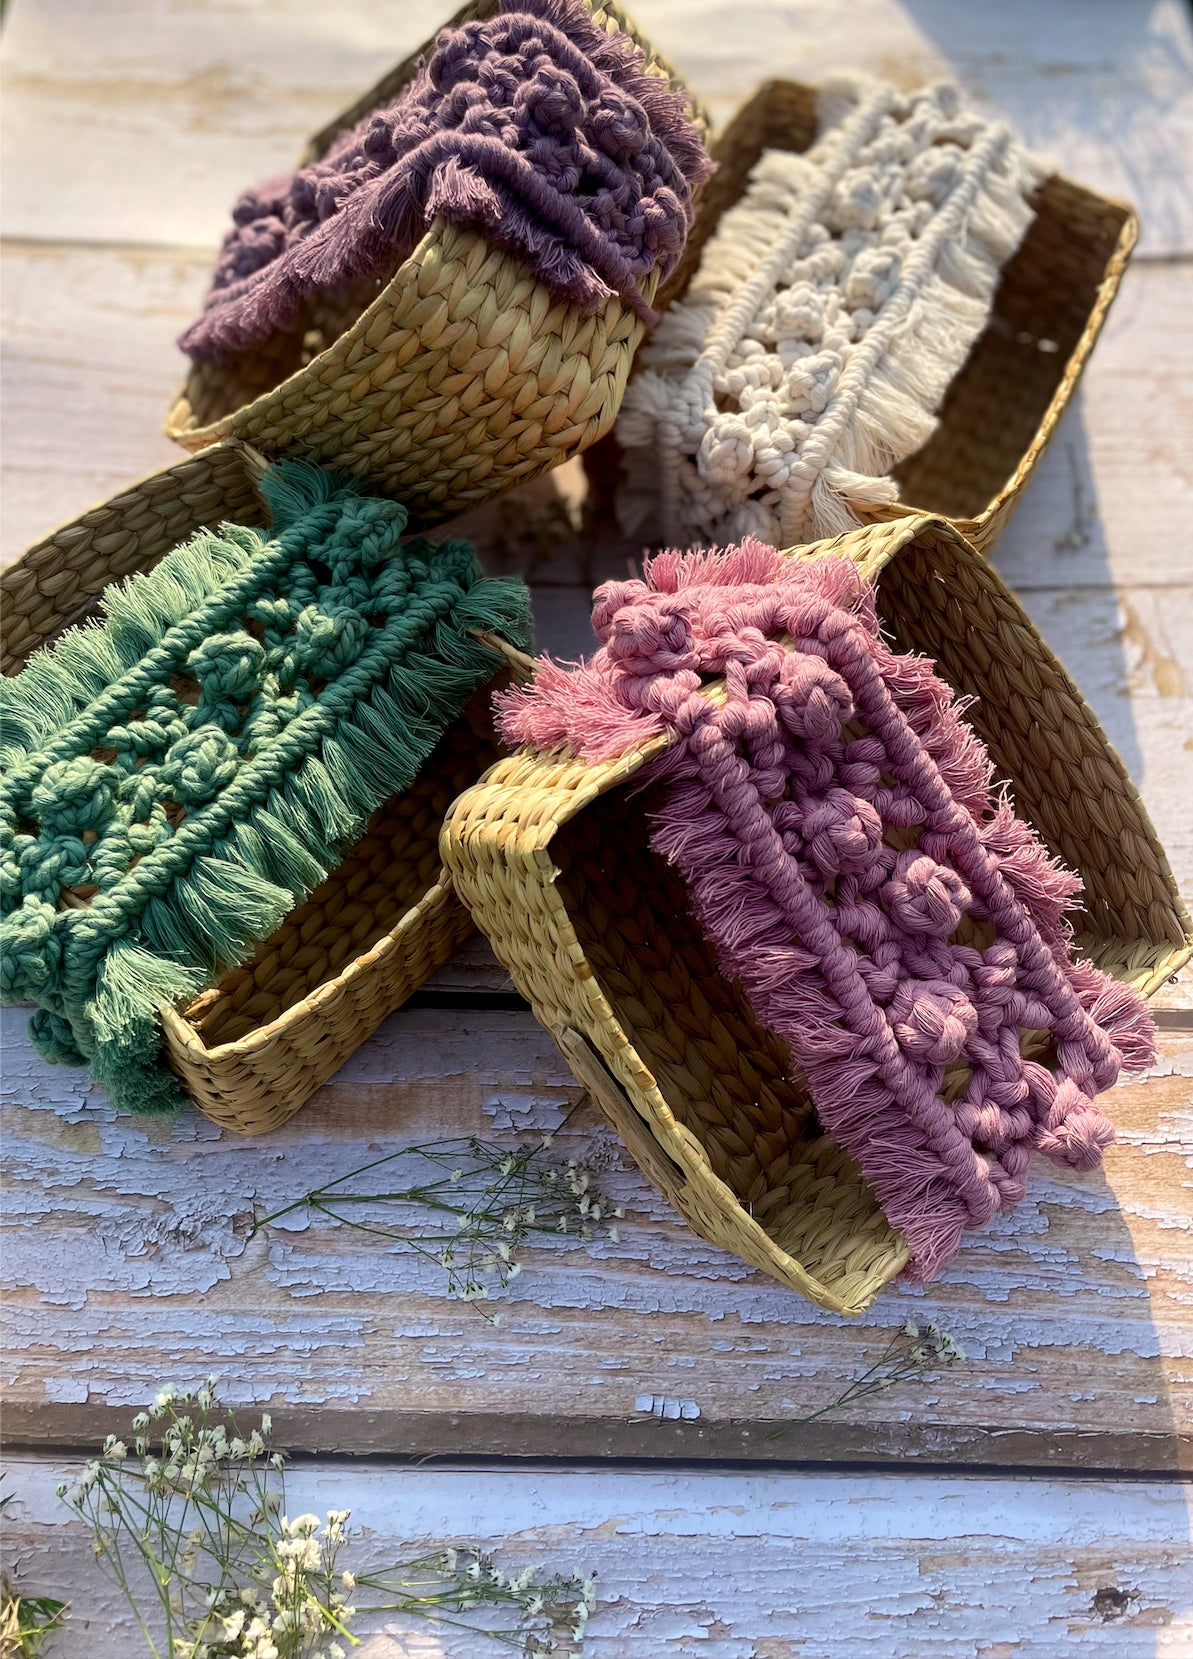 Macrame Spa Tray - DREAMY Colorways  (Made to order)